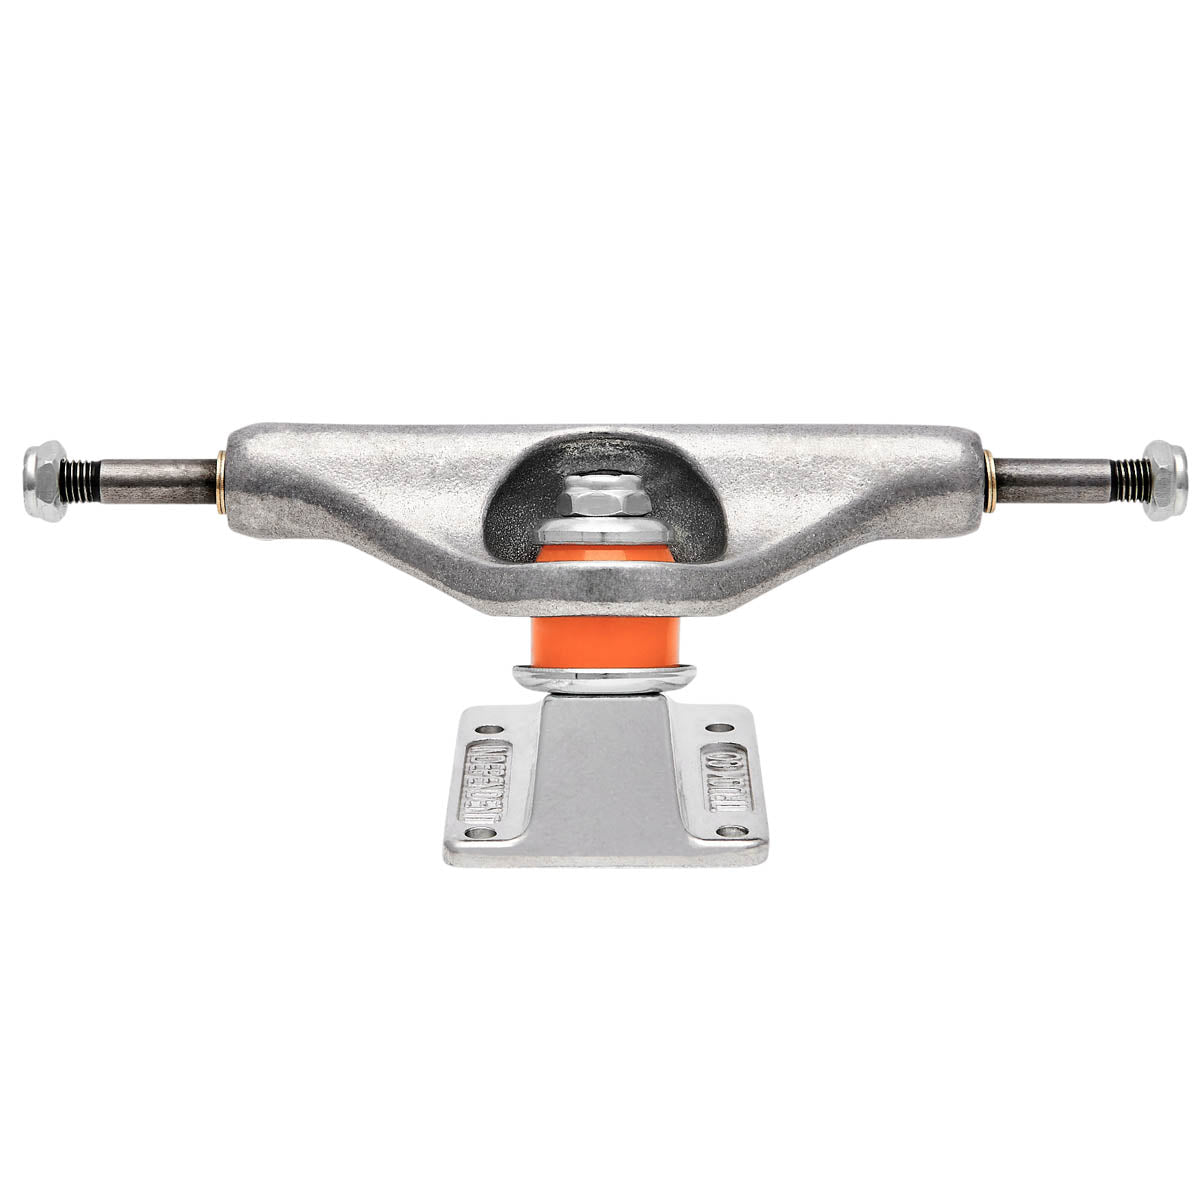 Independent Stage 11 Forged Hollow Standard Skateboard Trucks - Silver image 4